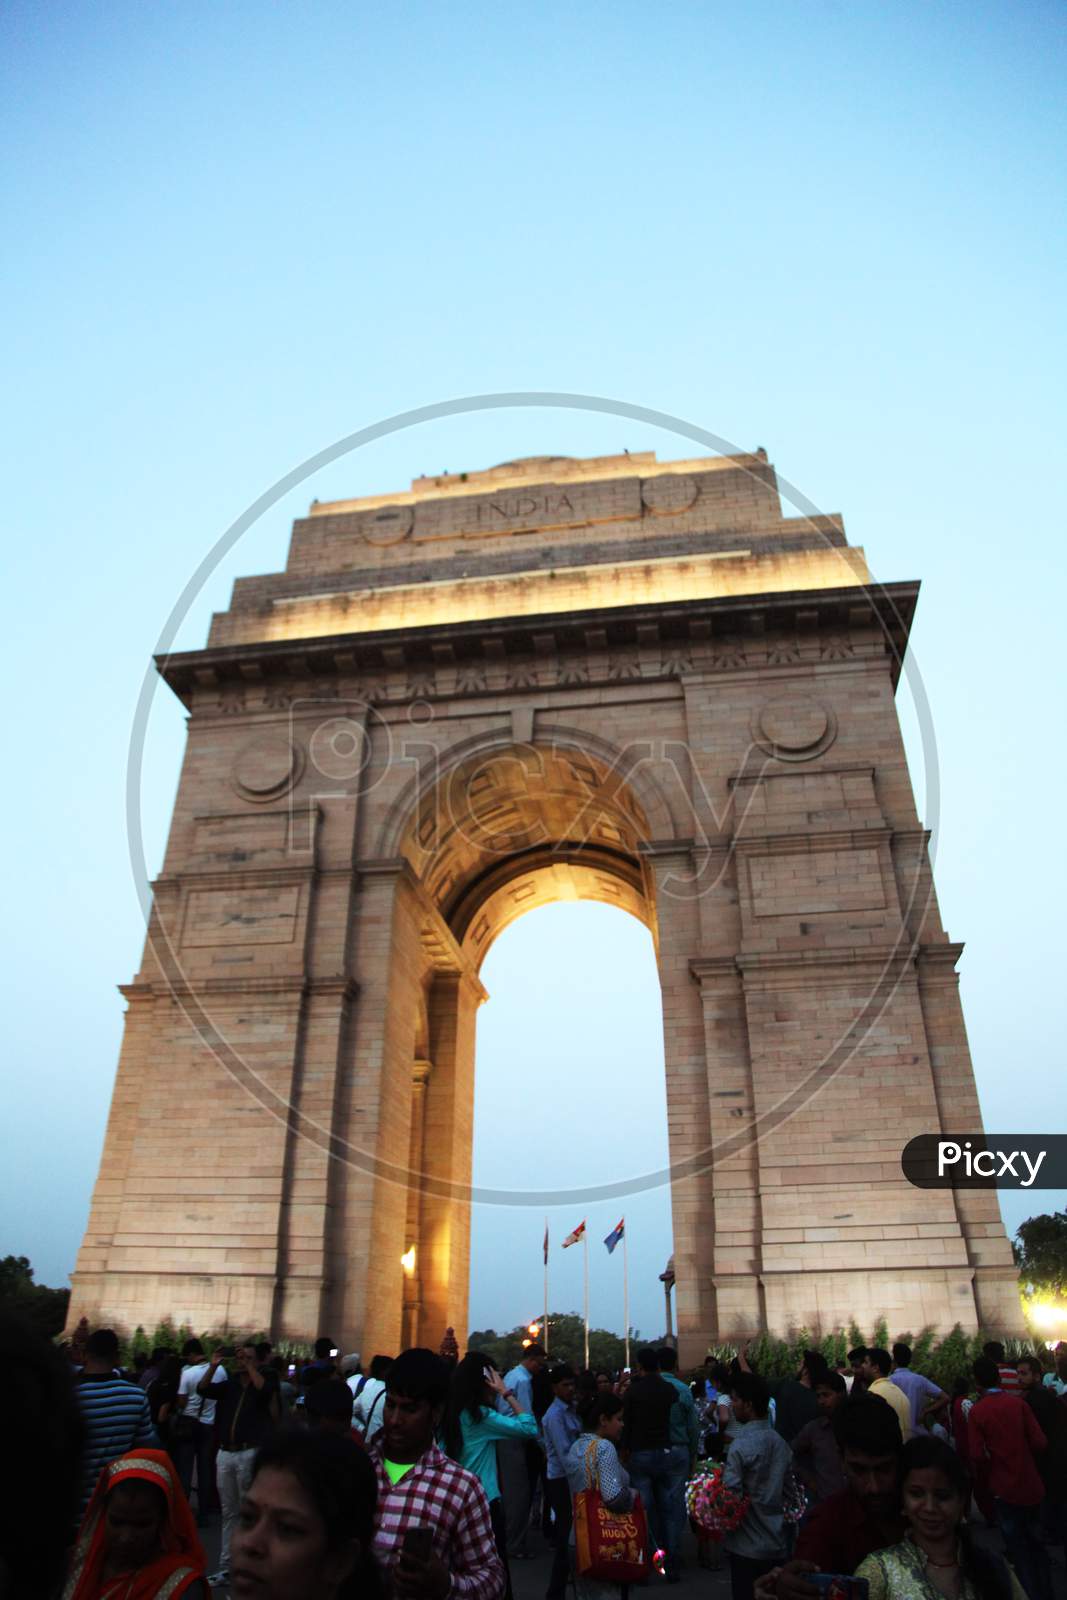 India Gate in New Delhi with Visitors in the Foreground